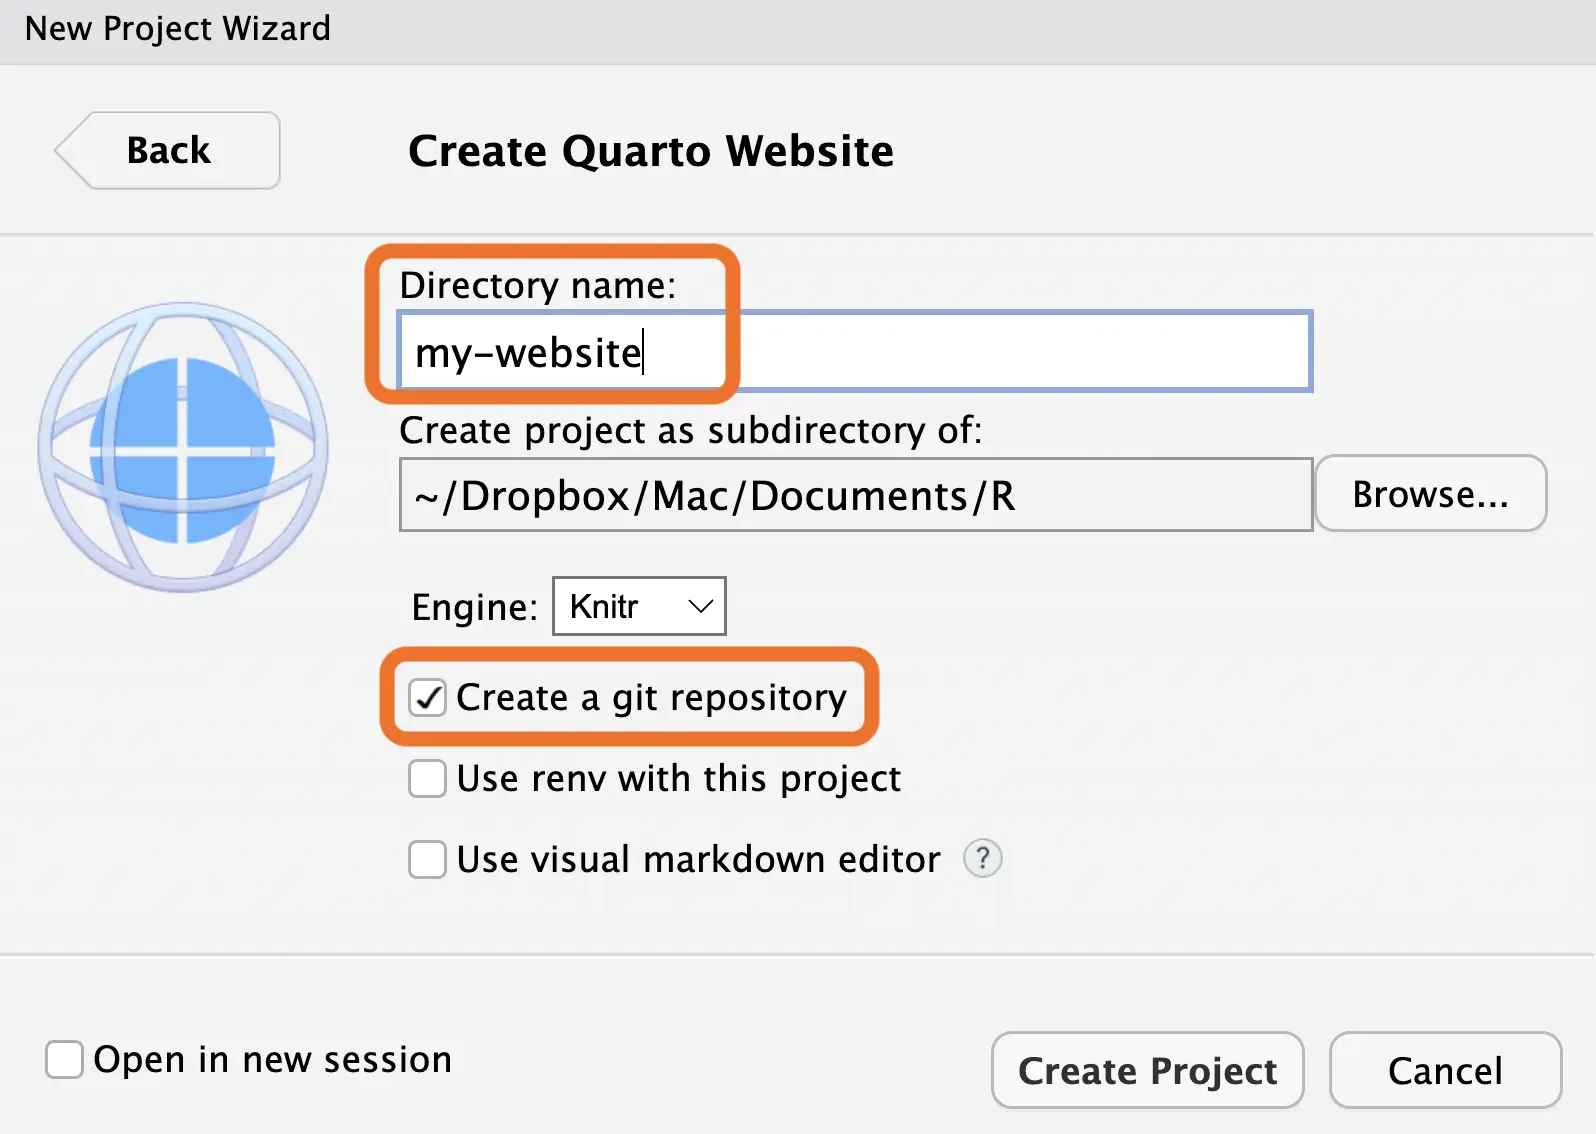 Create Quarto Website dialog box with a field for directory name and a checkbox selected to create a git repository.